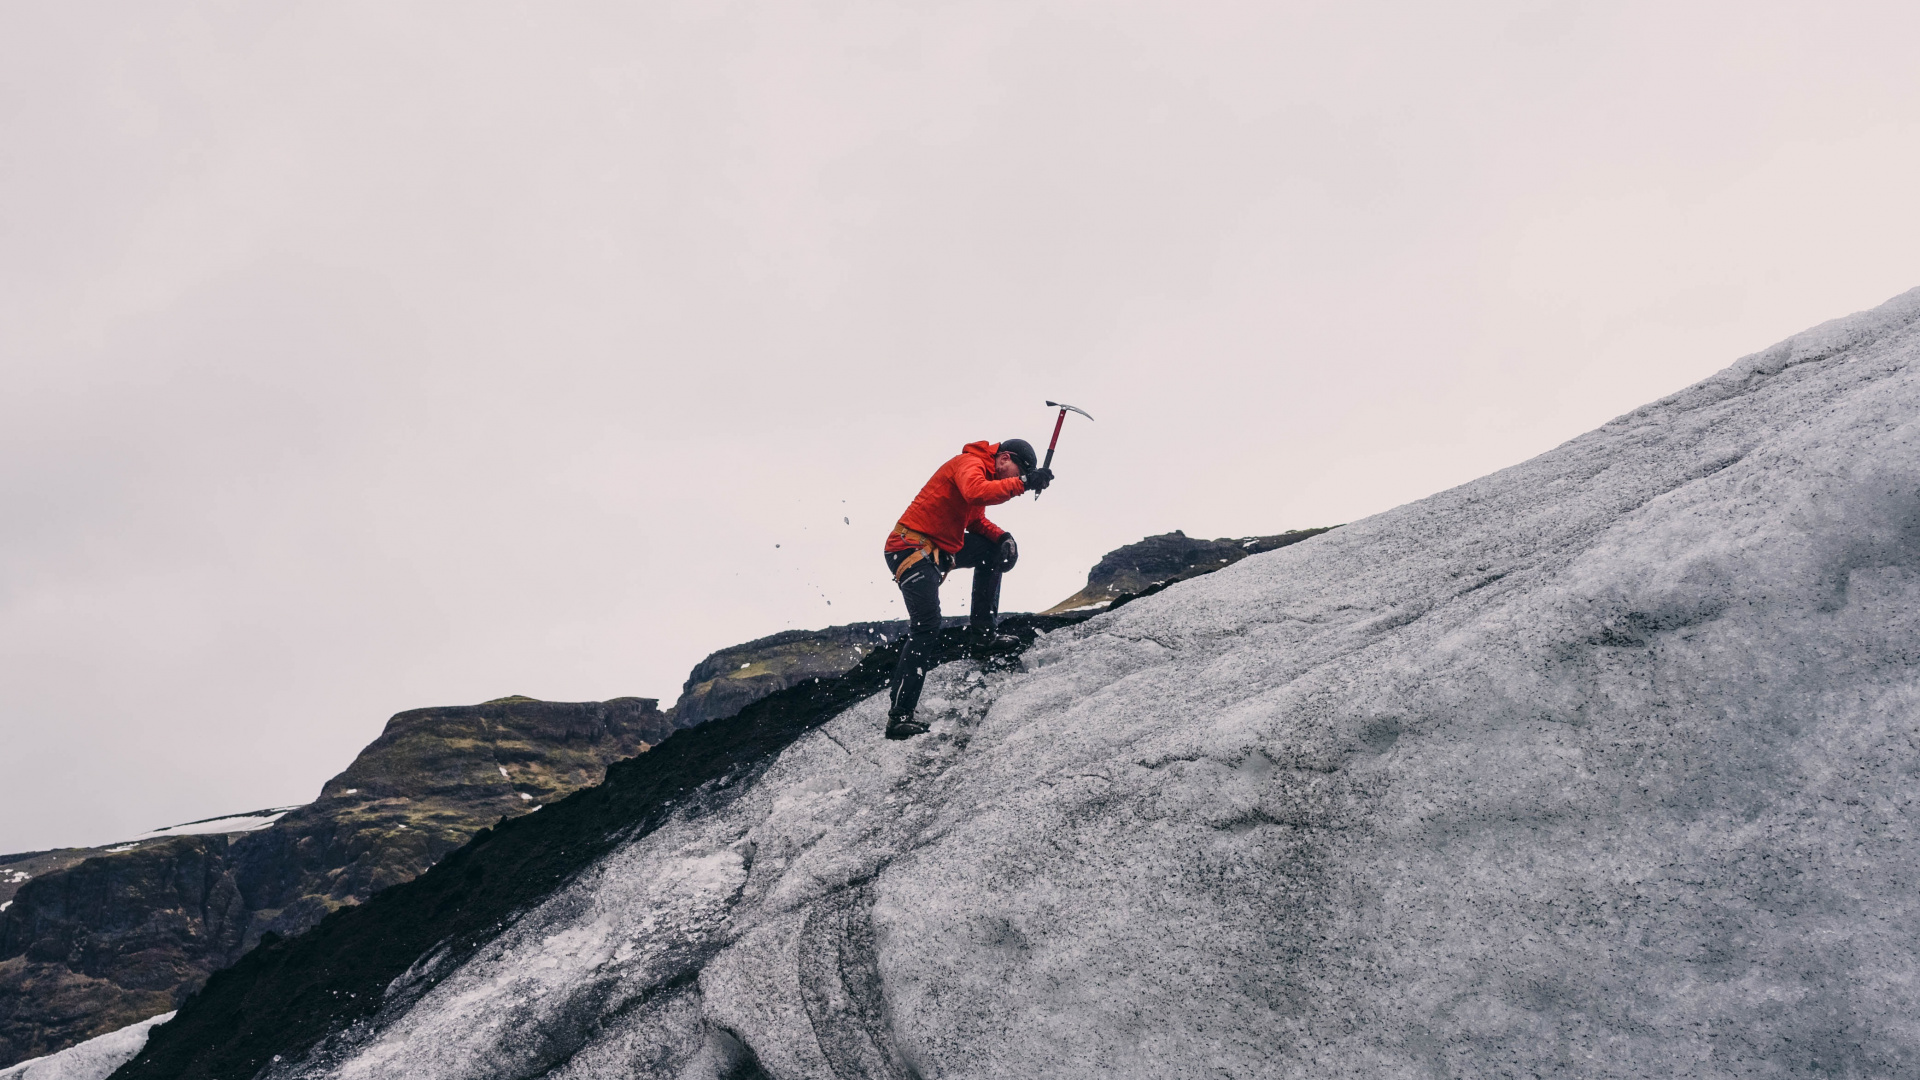 Person in Red Jacket and Black Pants Standing on Gray Rock Mountain During Daytime. Wallpaper in 1920x1080 Resolution